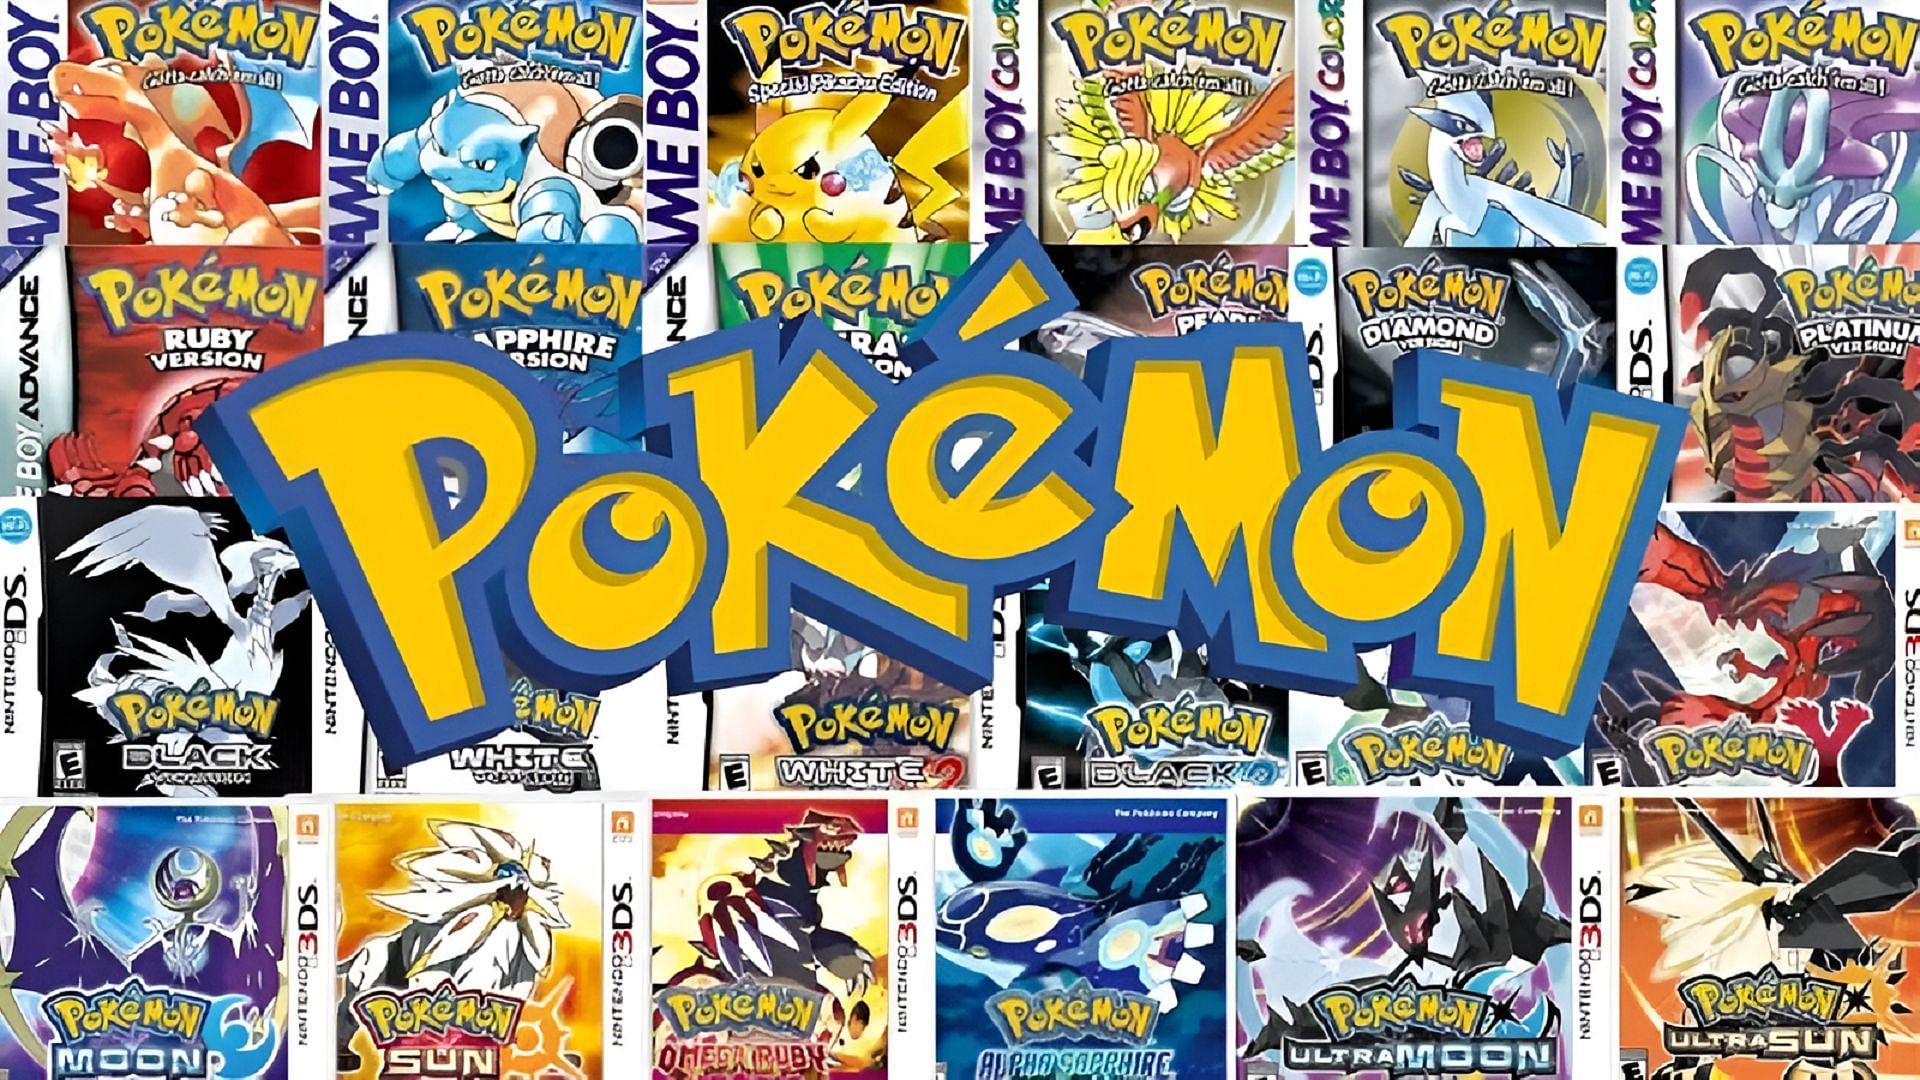 Various Pokemon games seen behind the franchise